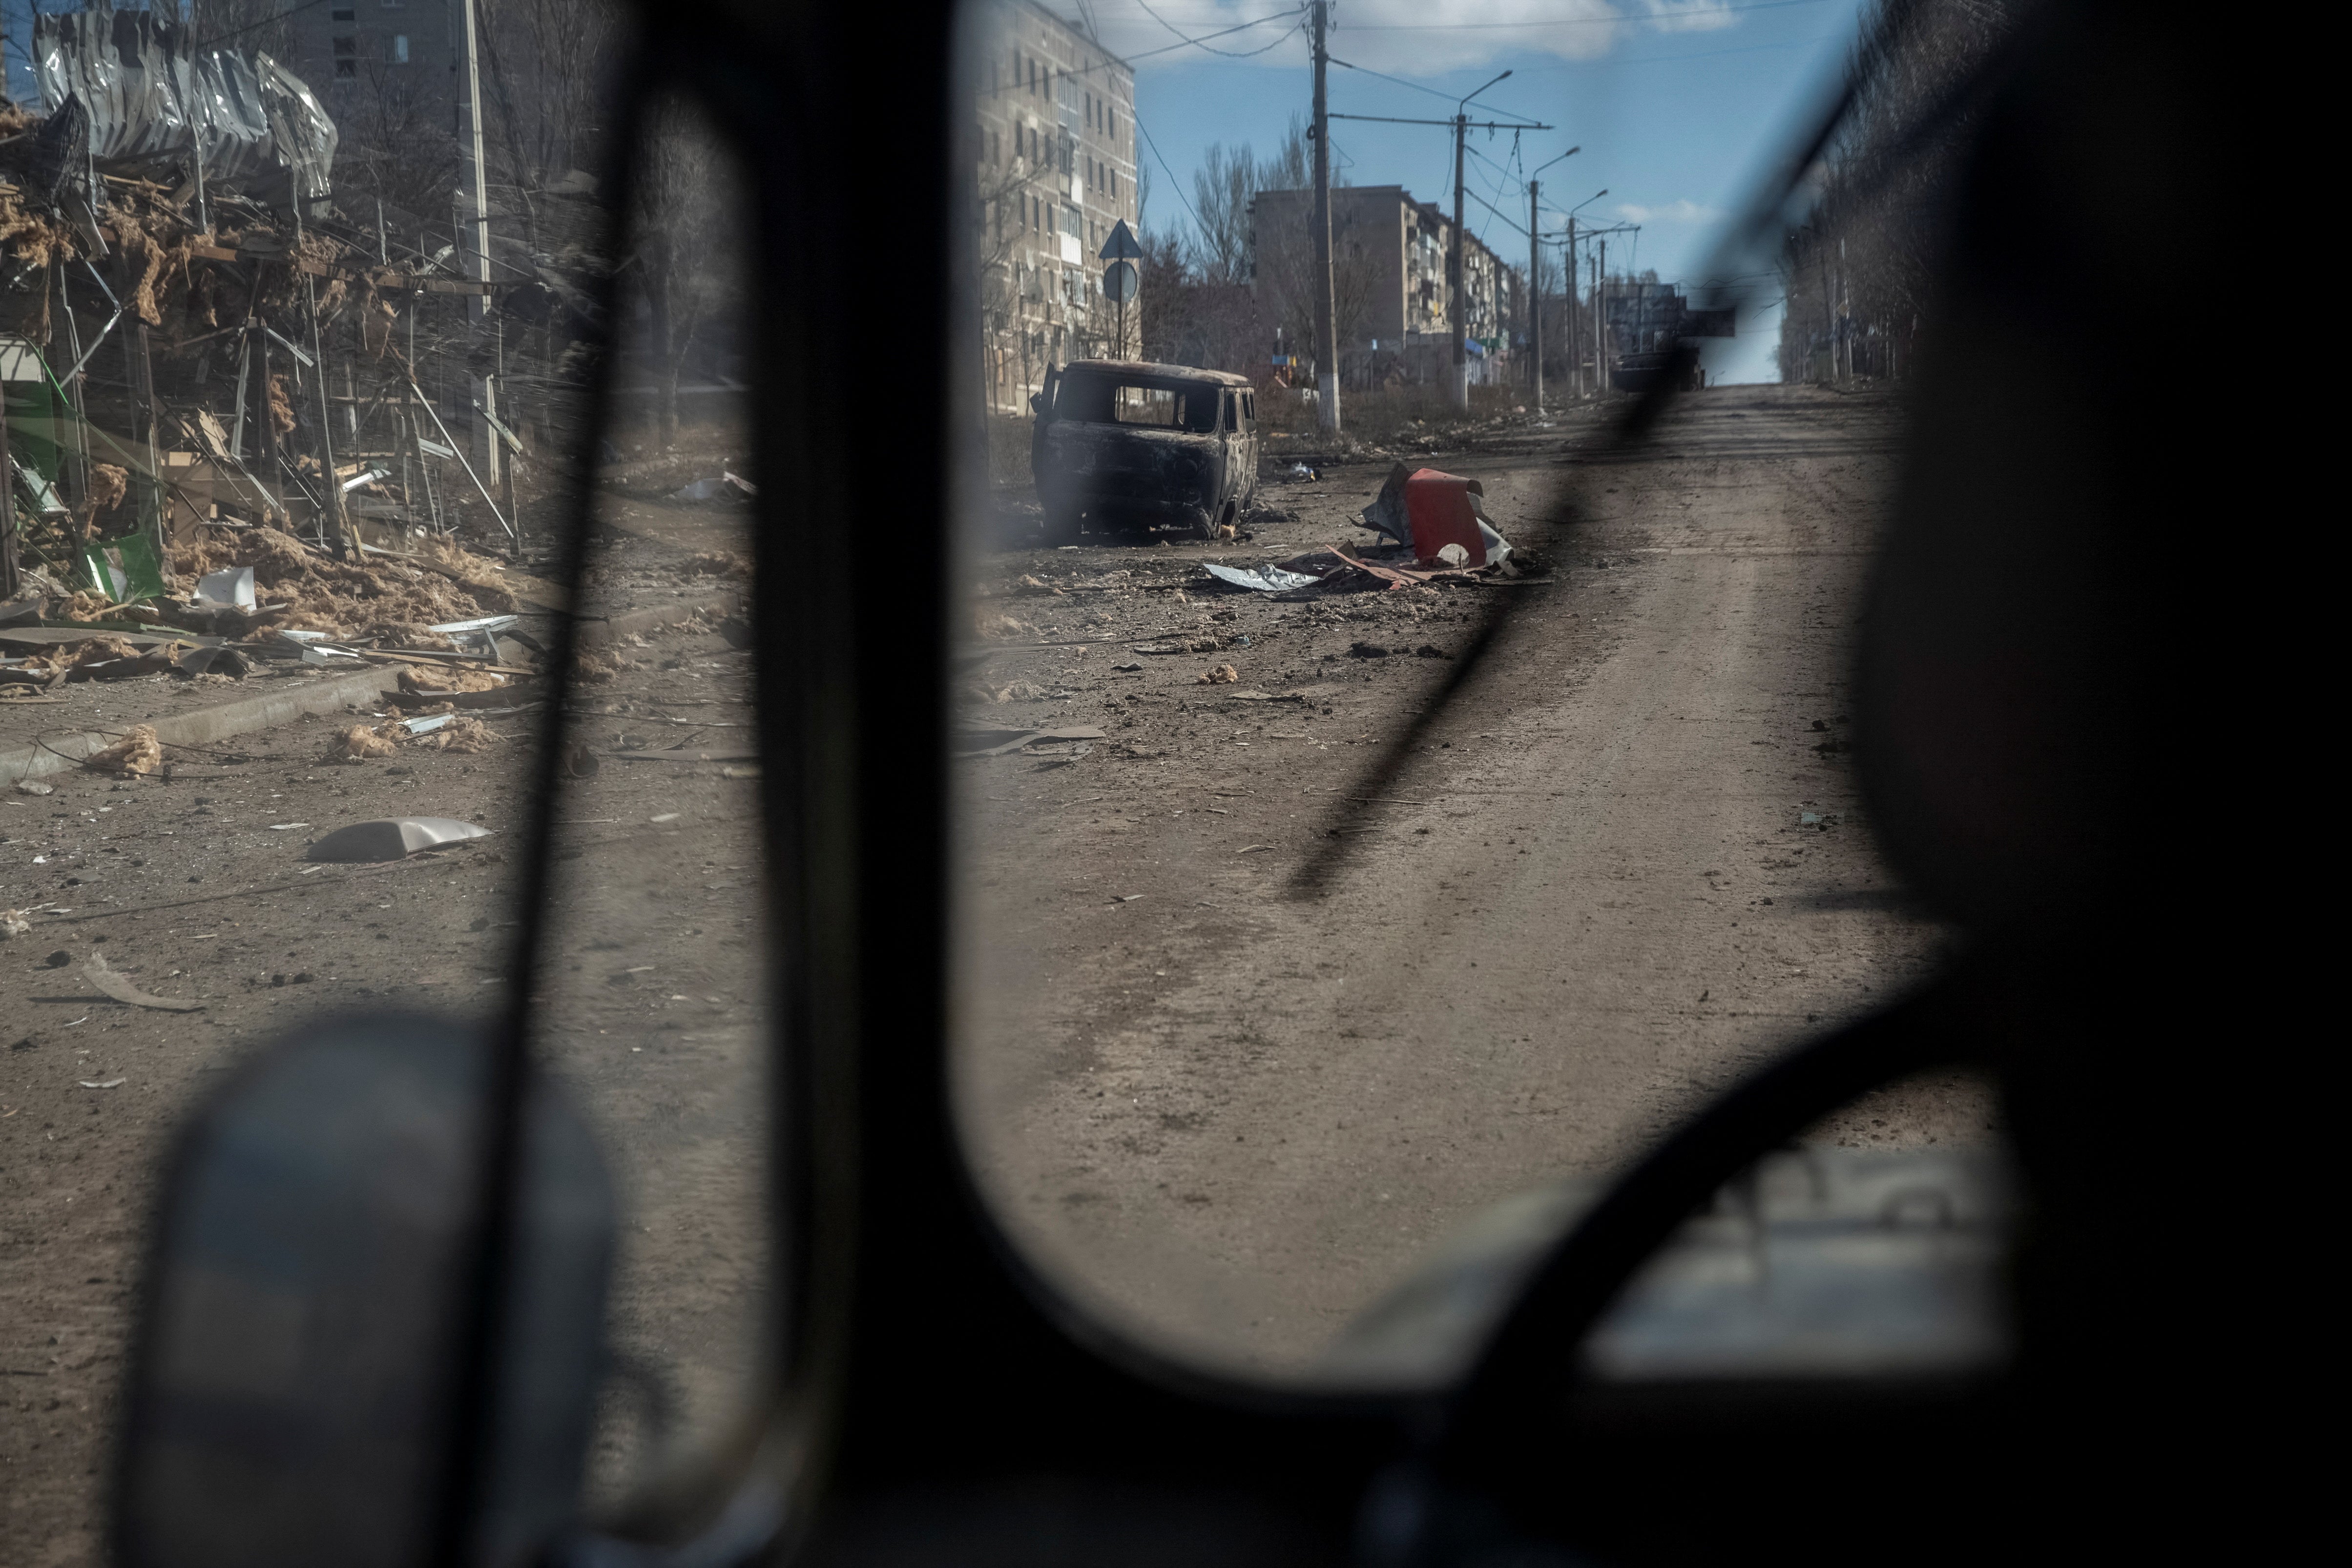 Ukrainian forces are still trying to hold out in some areas of the devastated city